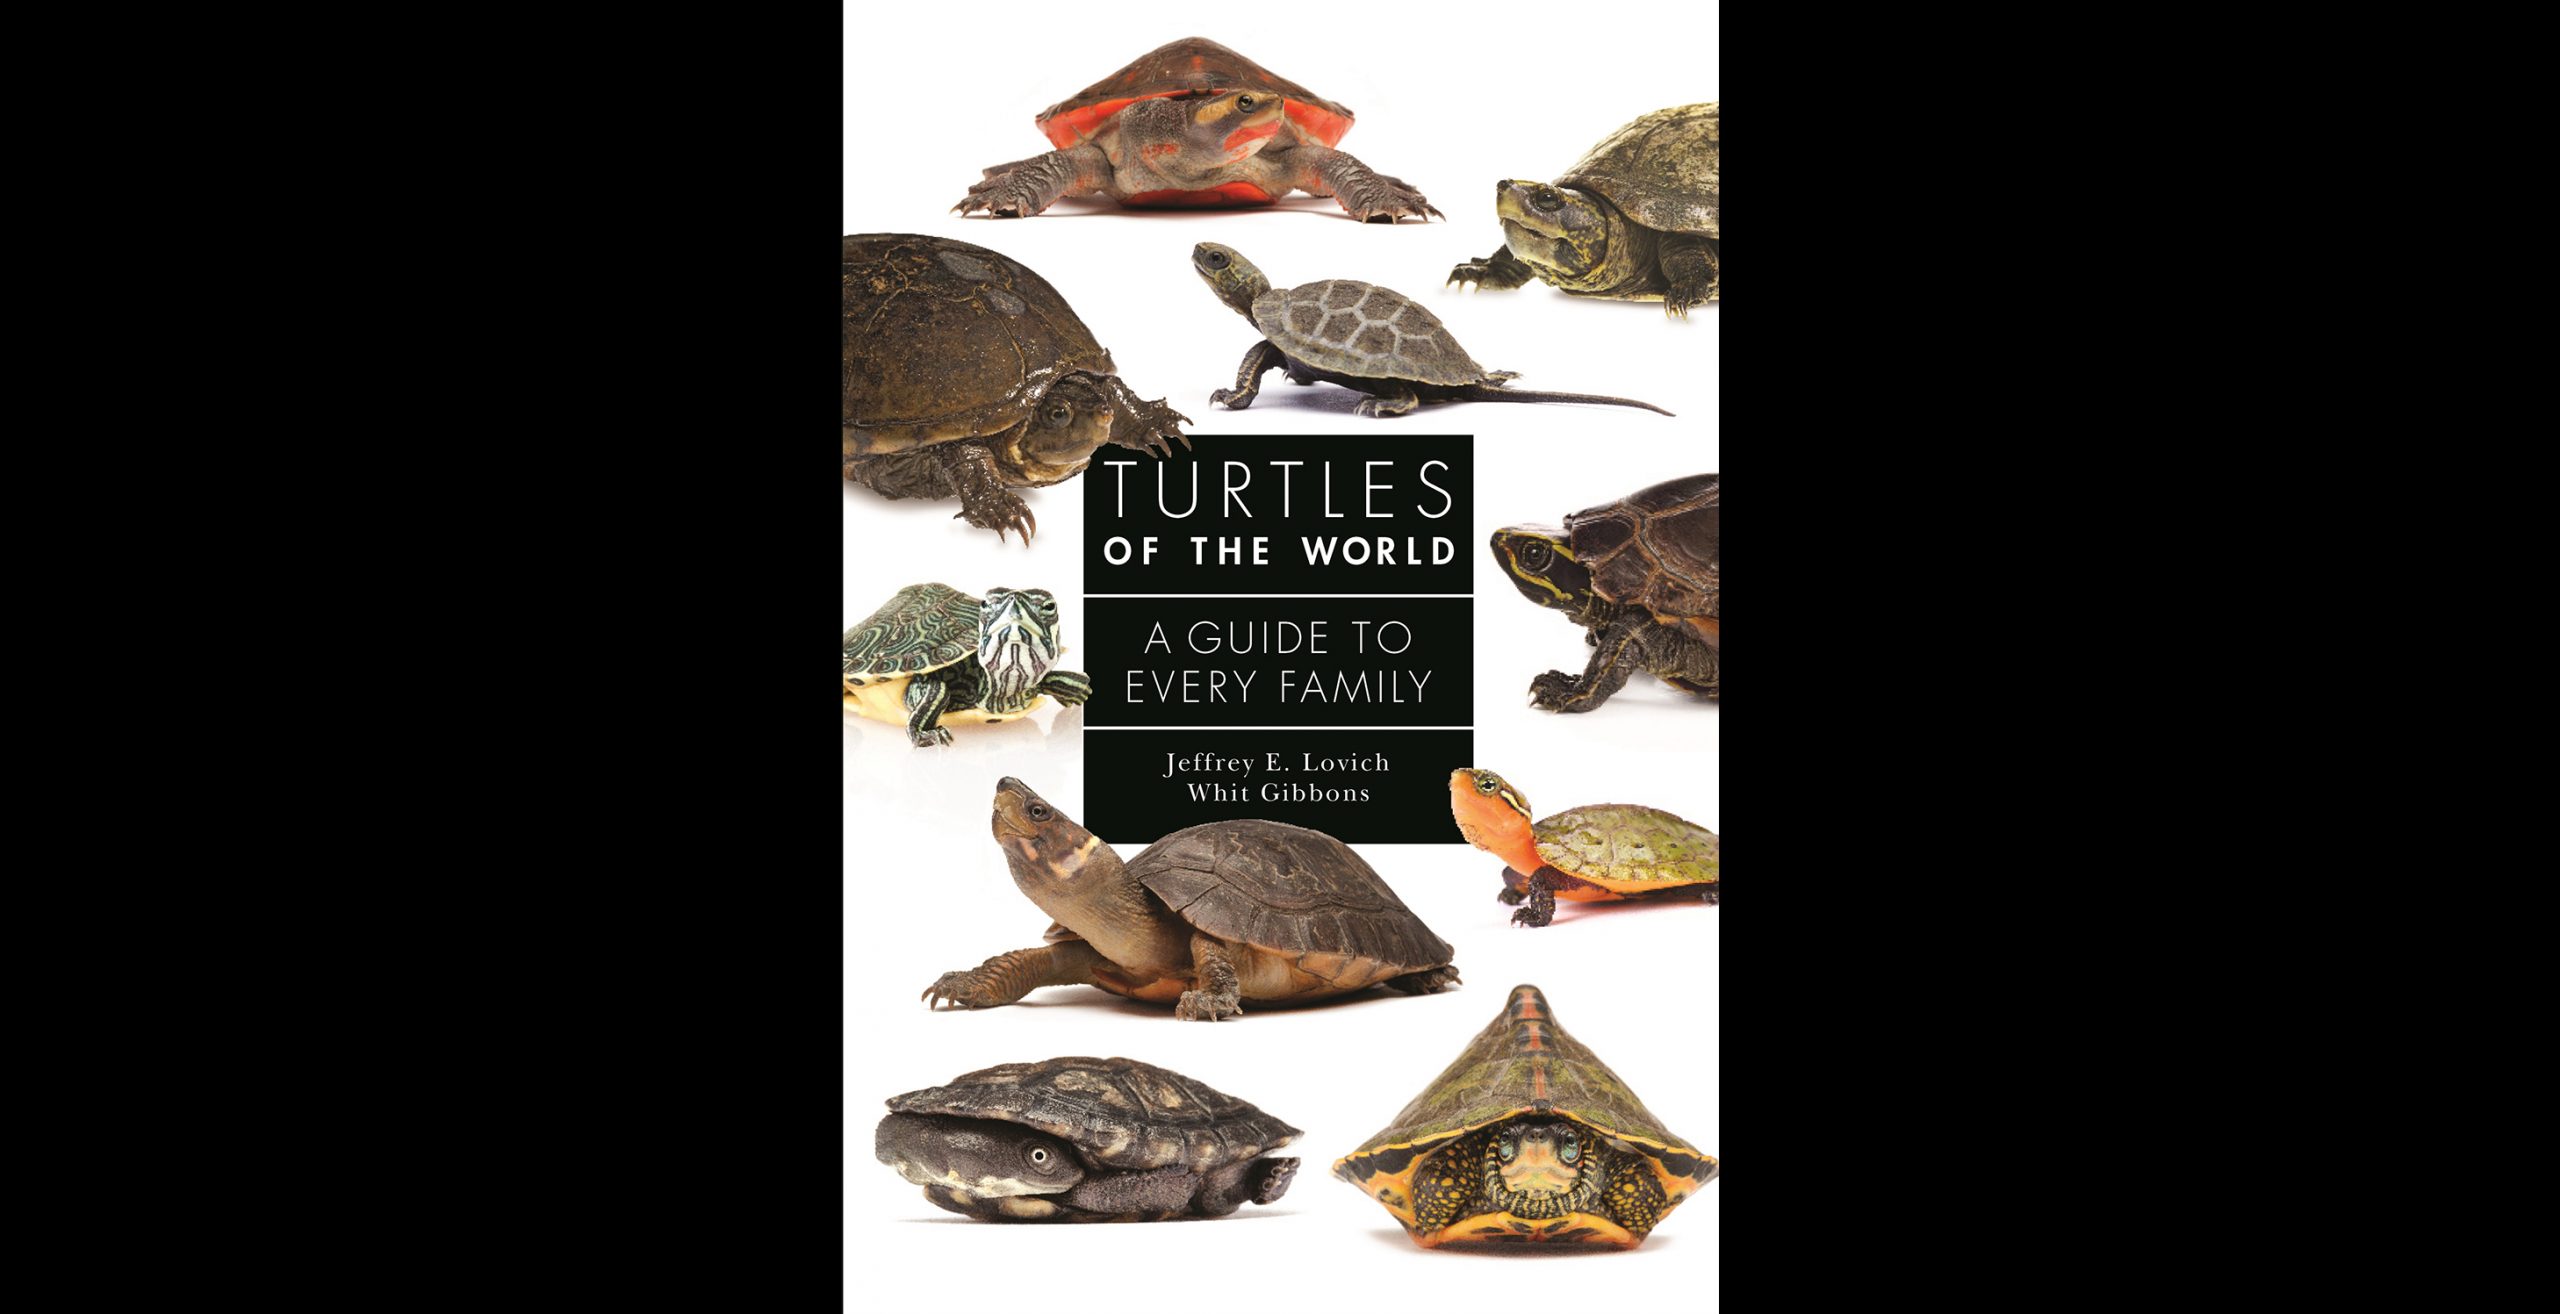 In a world of frogs and tortoises